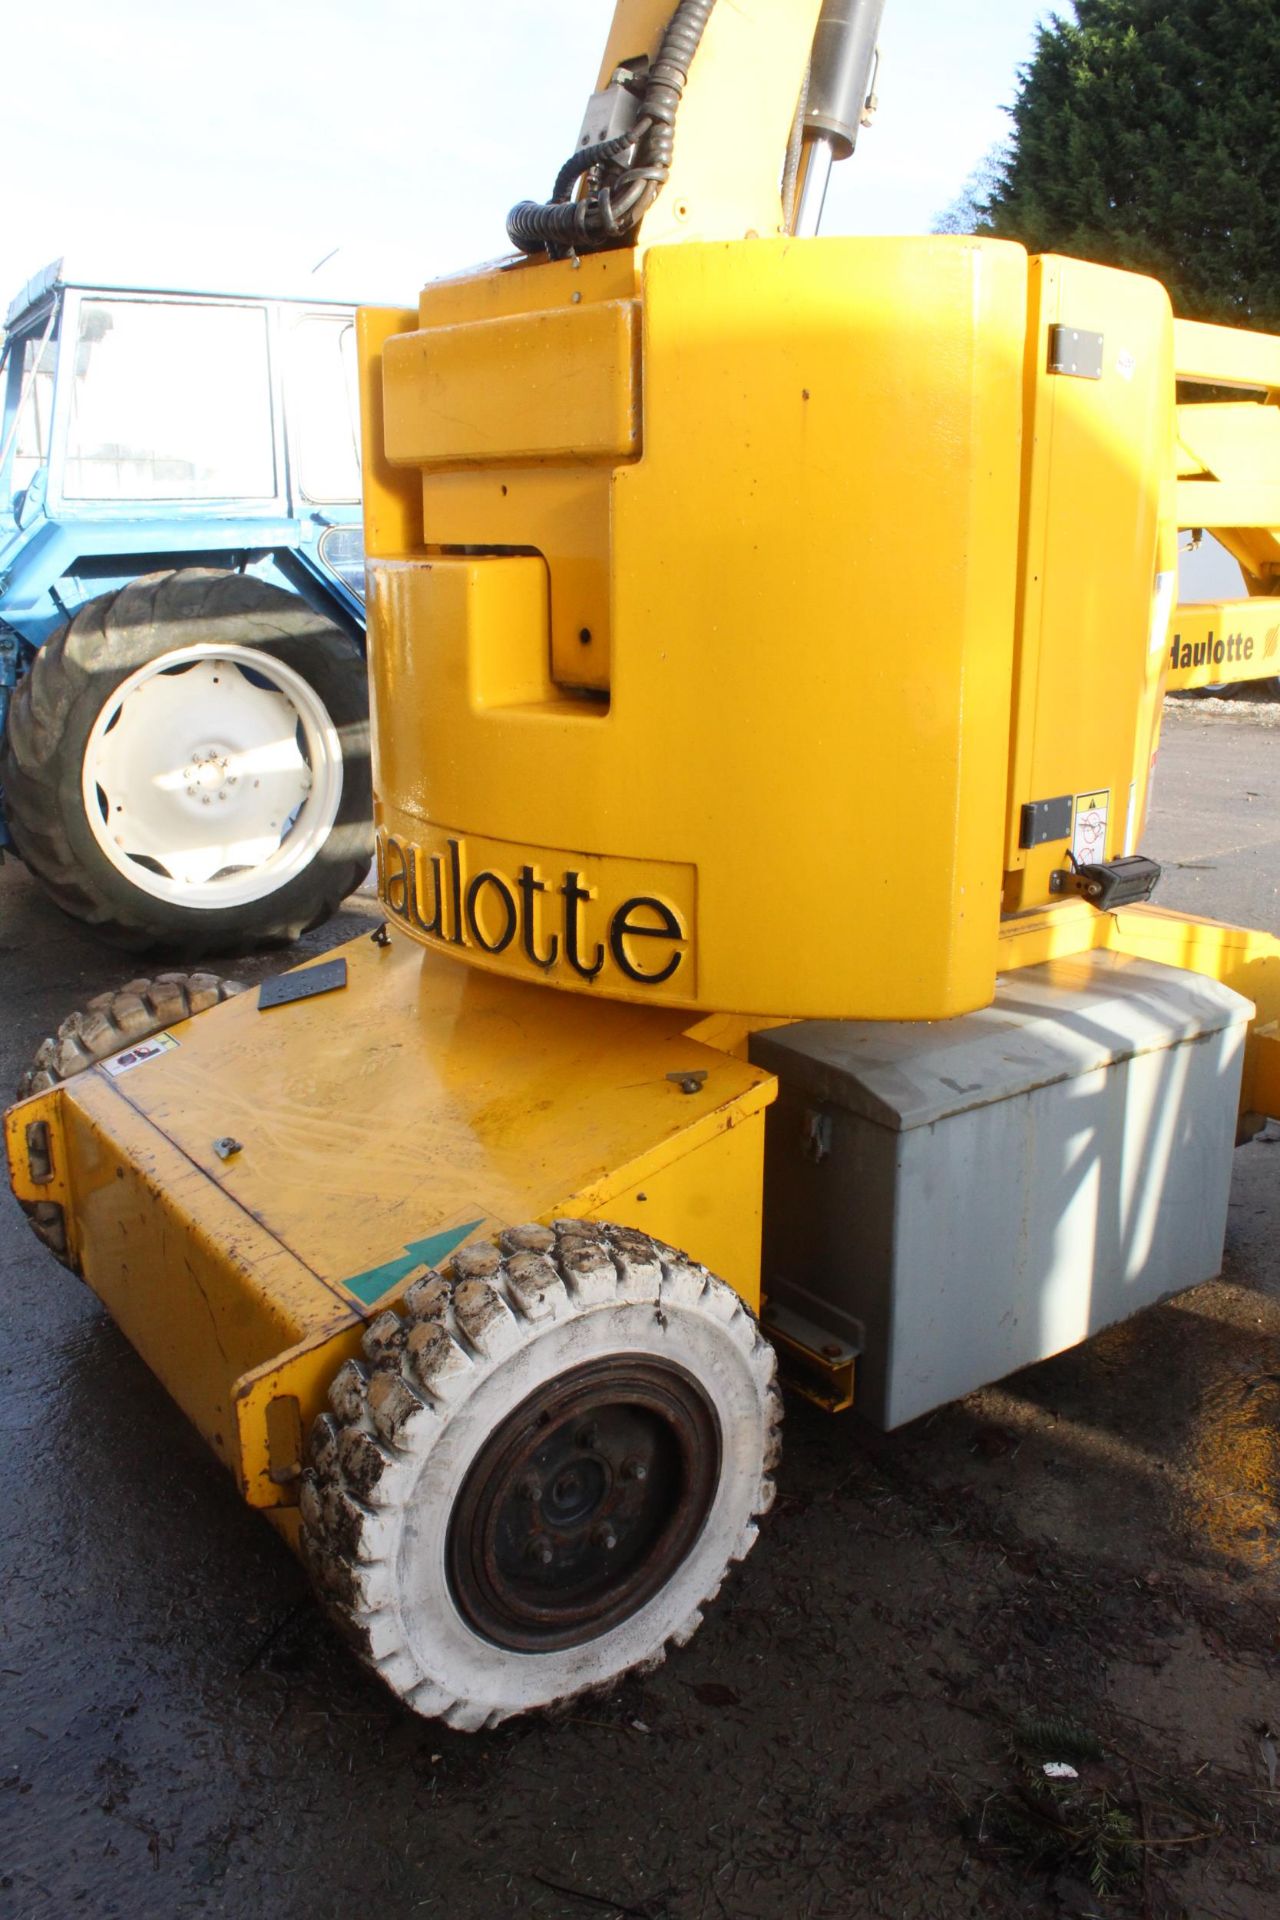 INDOOR HAULETTE HAISI 48V HA15 CHERRY PICKER APPROX 2000 HOURS BUILT IN 110/240V CHARGER 15 METRE - Image 7 of 10